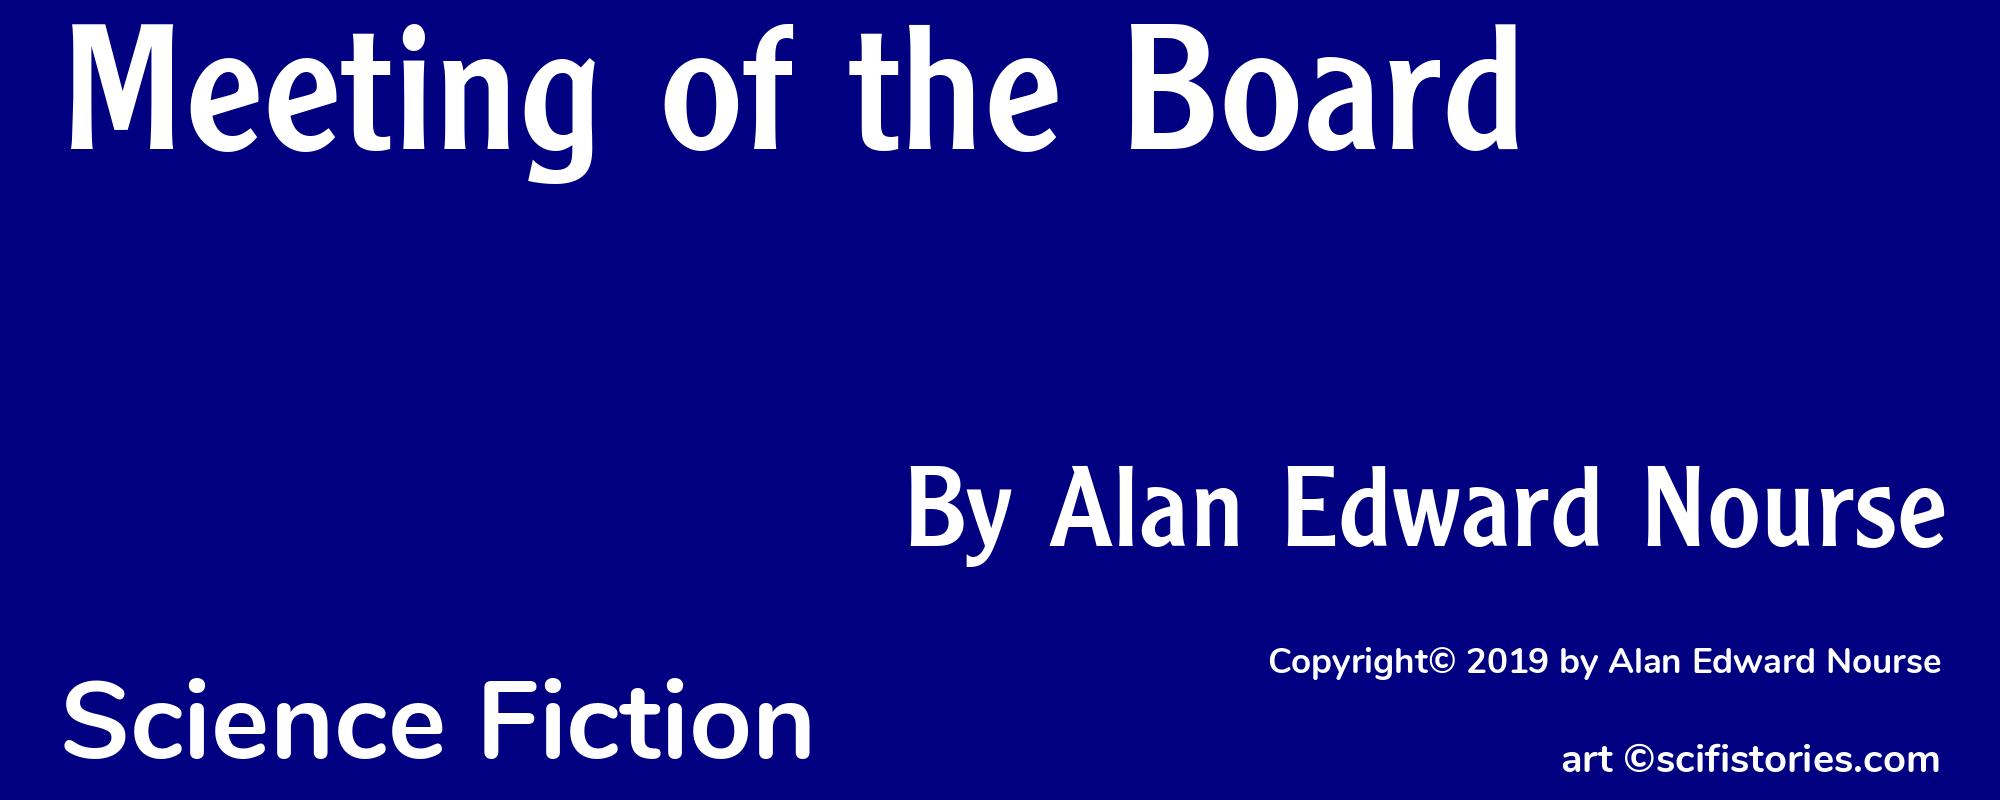 Meeting of the Board - Cover